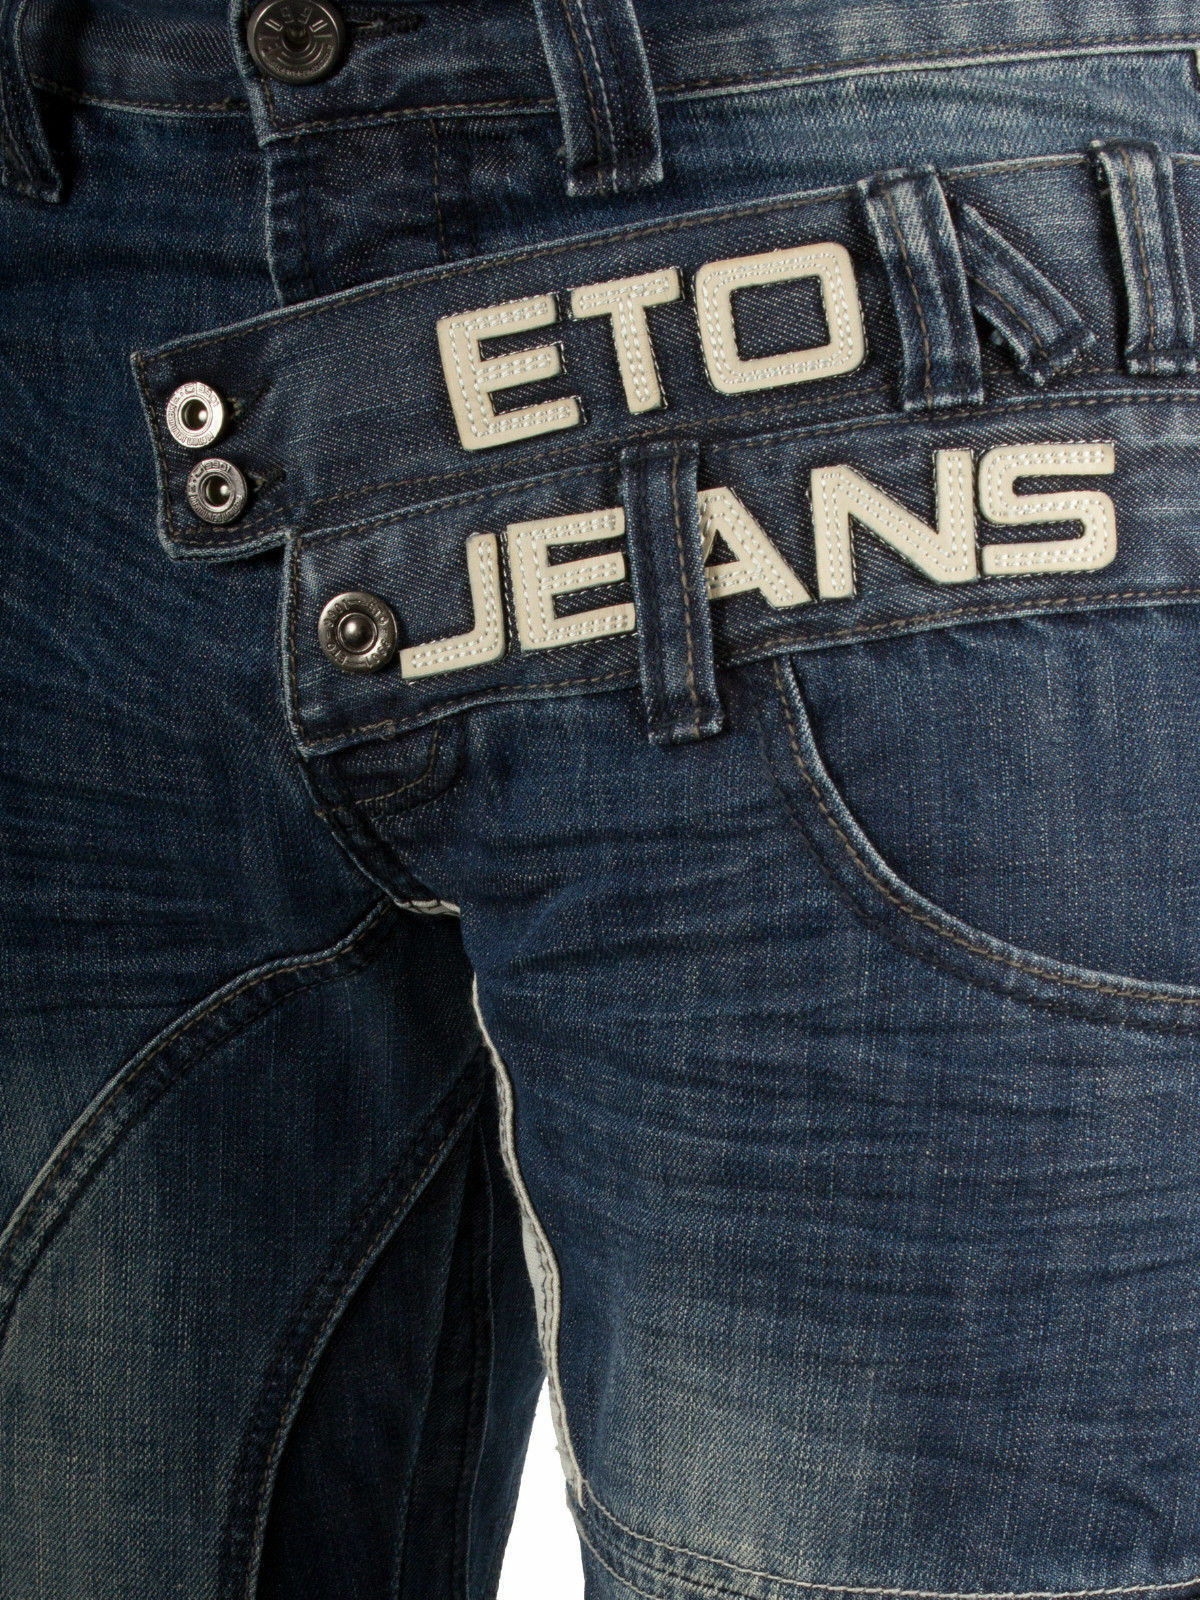 funky jeans brand